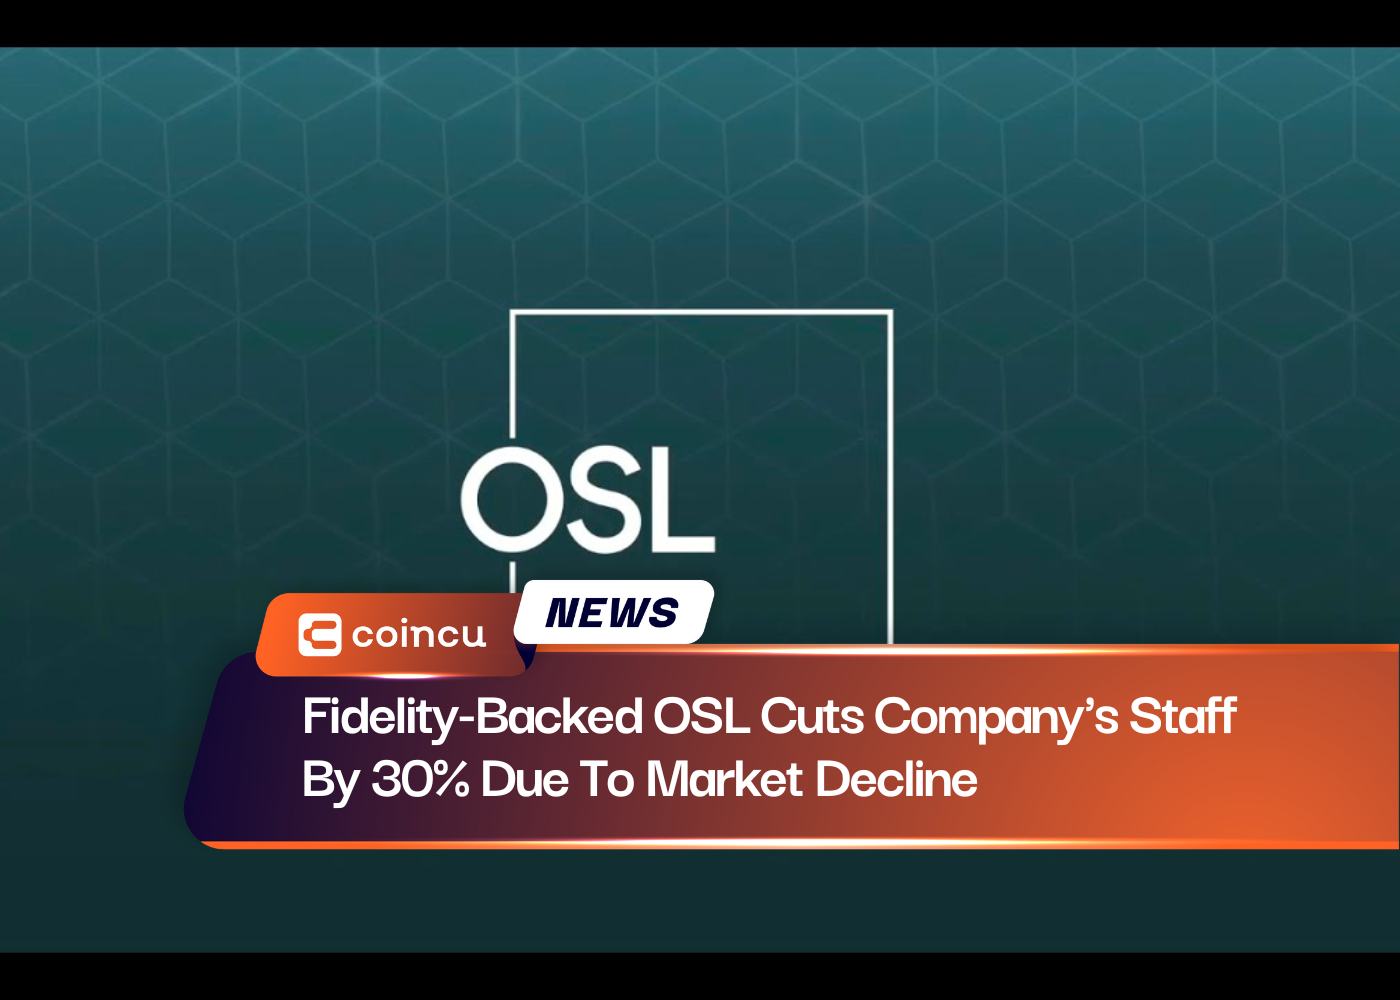 Fidelity-Backed OSL Cuts Company's Staff By 30% Due To Market Decline